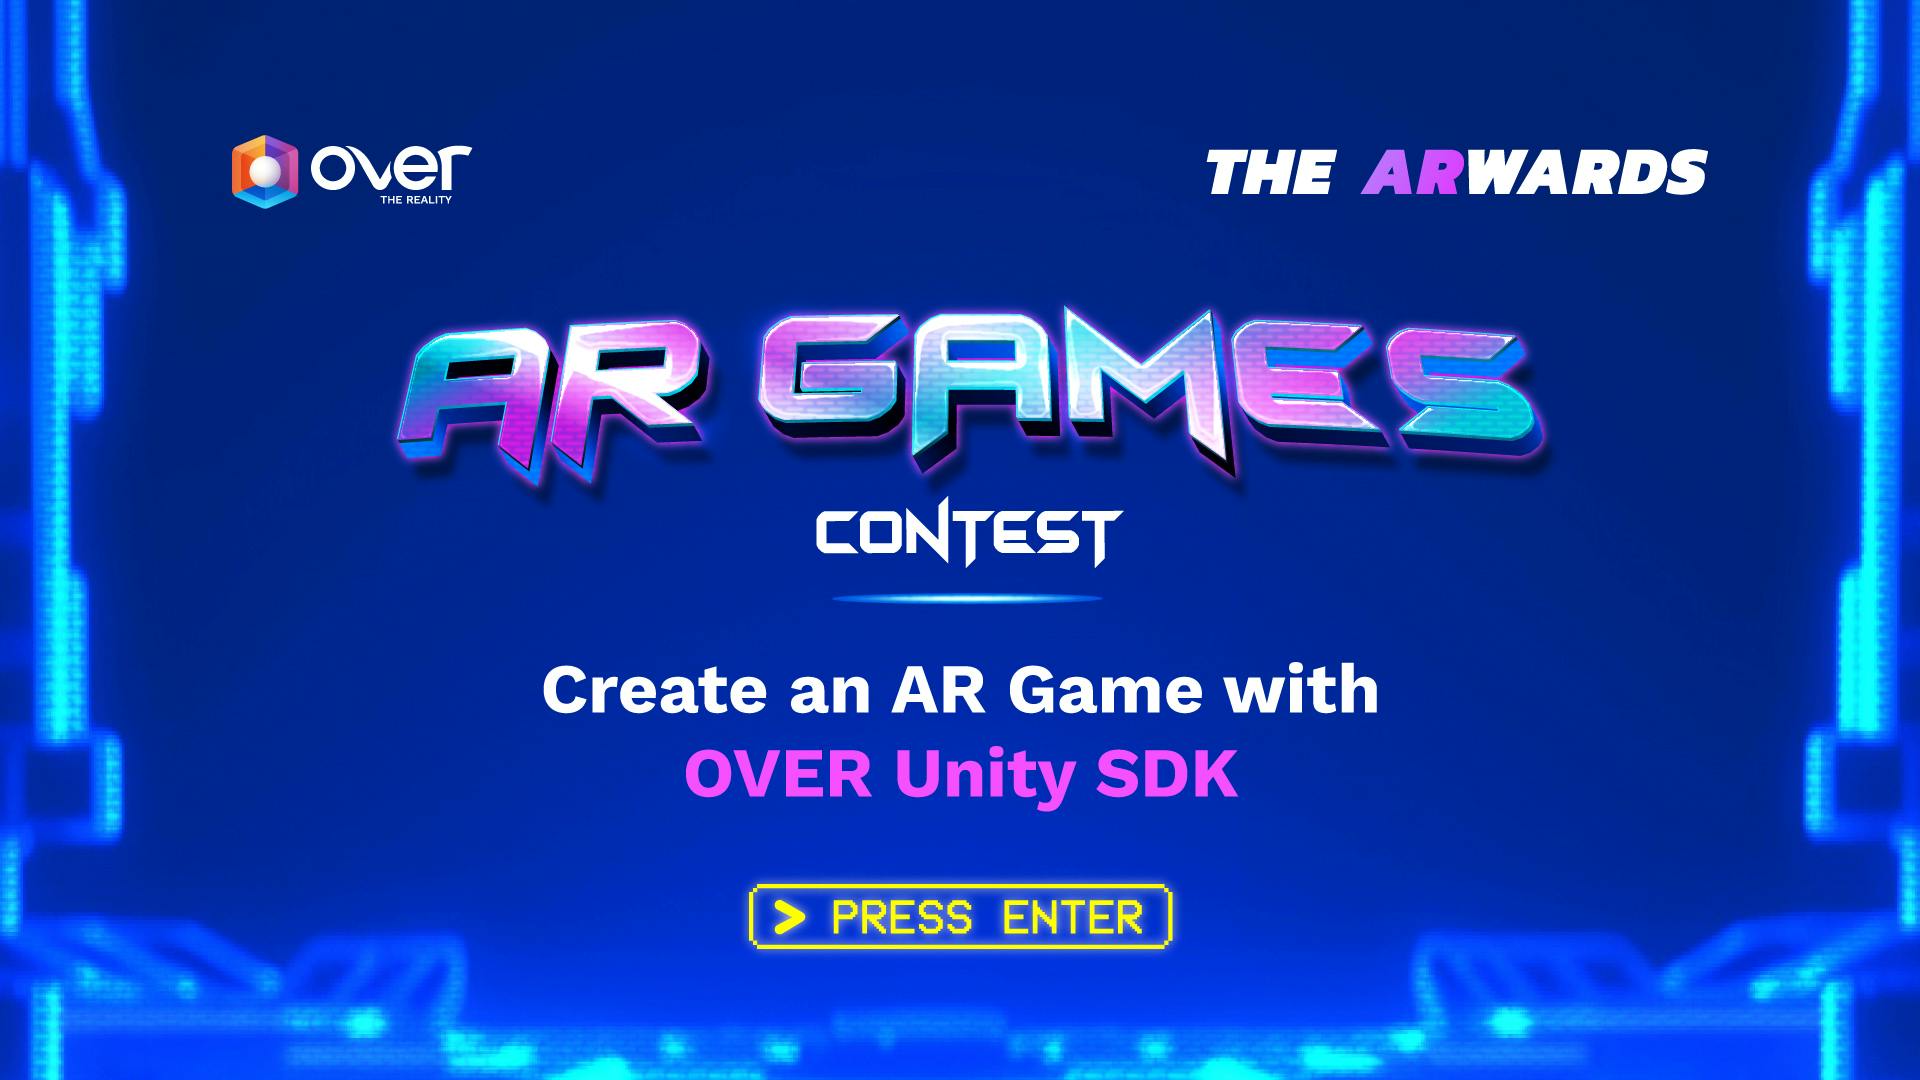 AR gaming takes center stage in the new edition of OVER ARwards